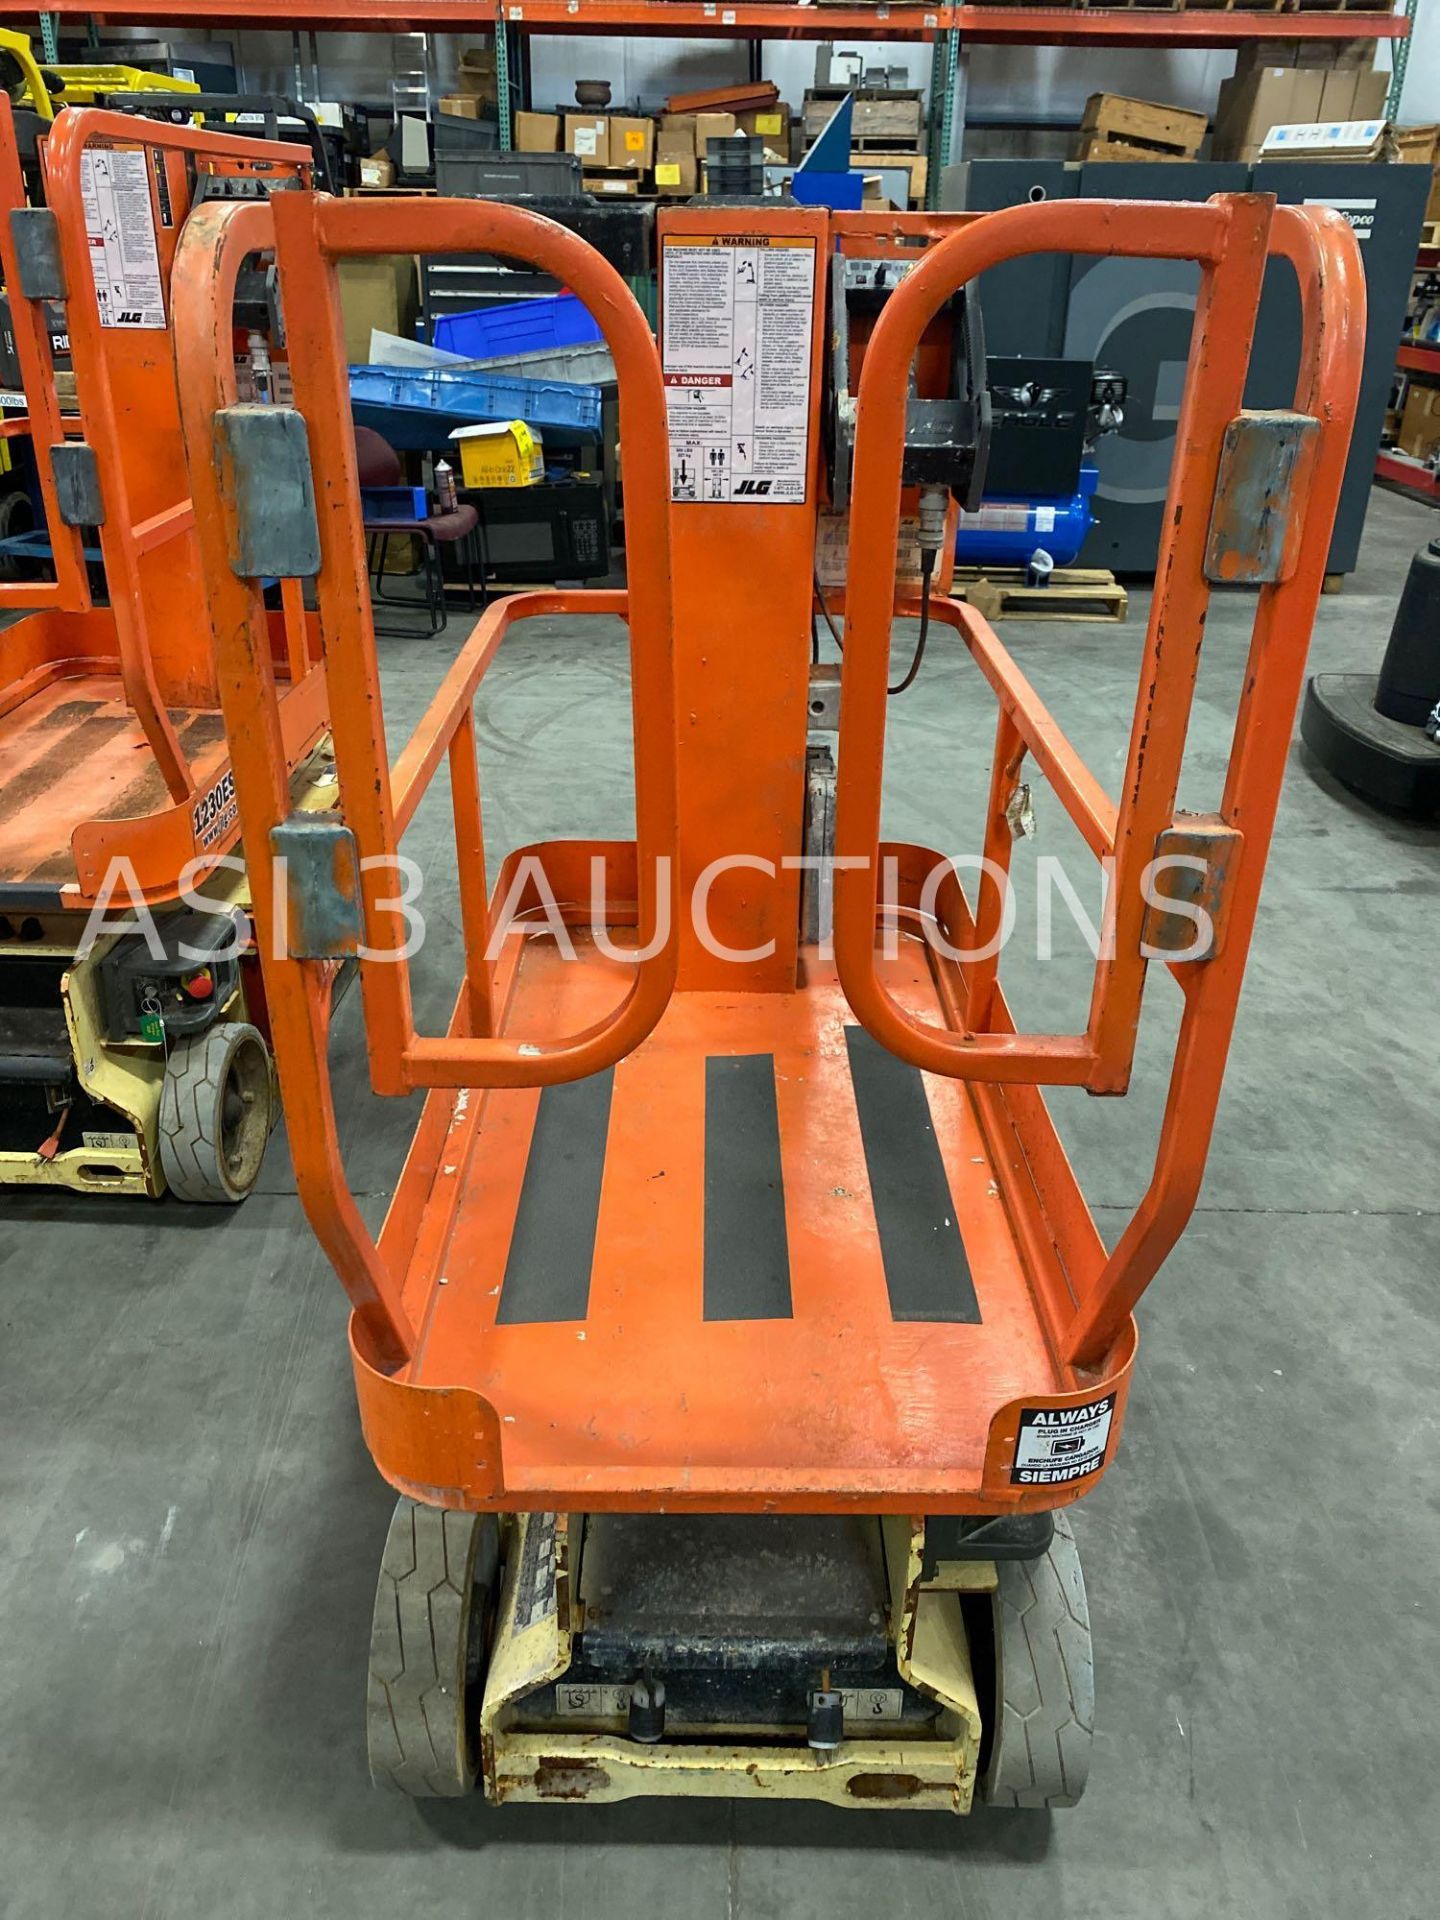 JLG ELECTRIC MAN LIFT MODEL 1230ES, 12' PLATFORM HEIGHT, SELF PROPELLED, BUILT IN BATTERY CHARGER - Image 6 of 7